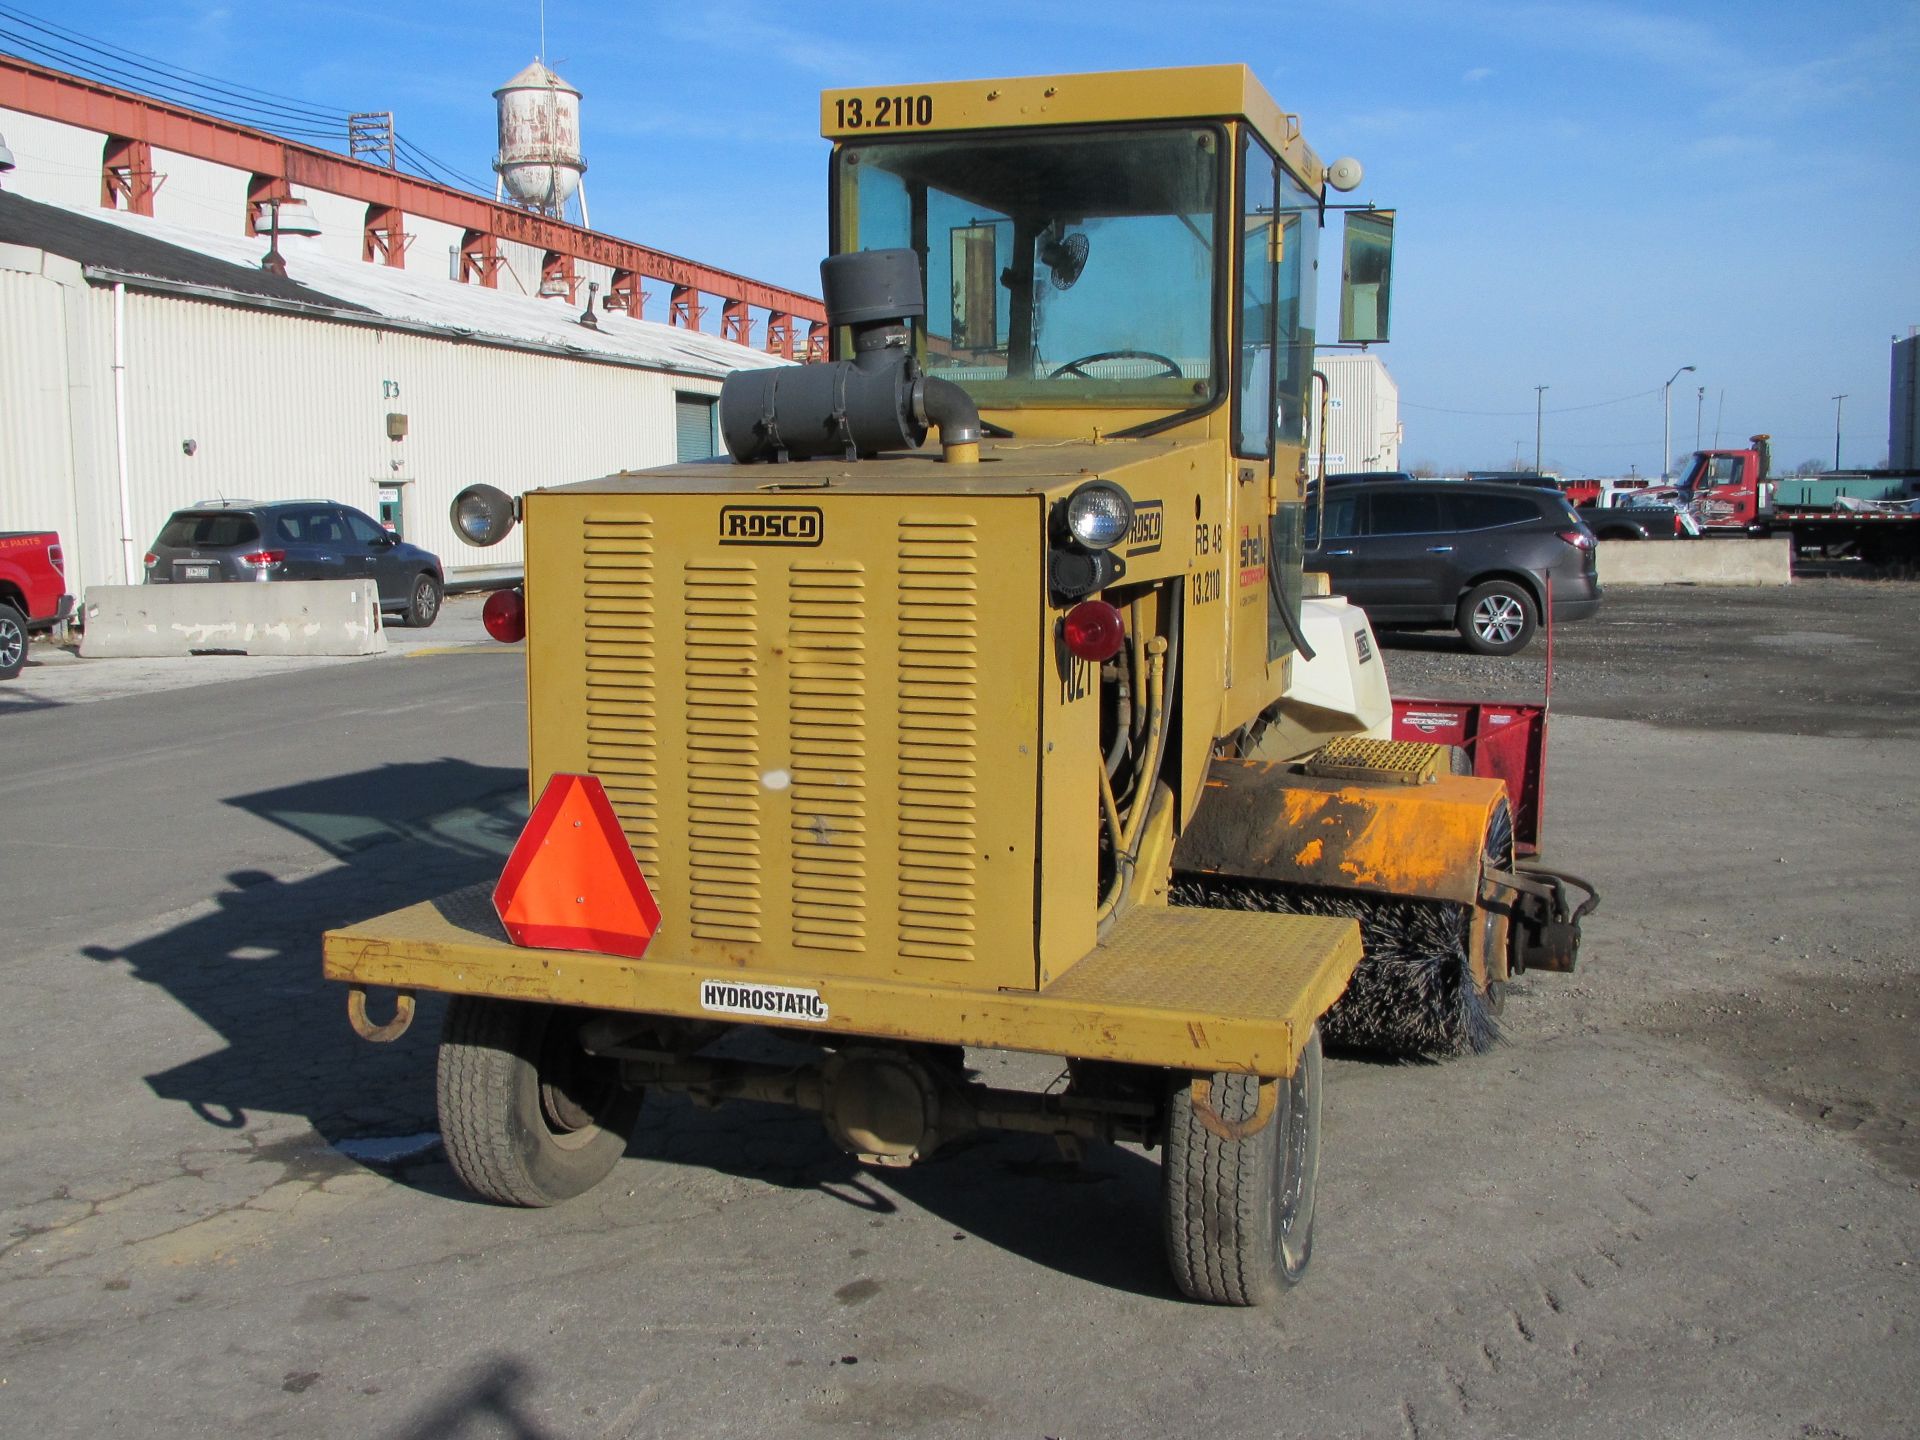 Rosco RB48 Self-Propelled Broom with snow plow - Image 6 of 14